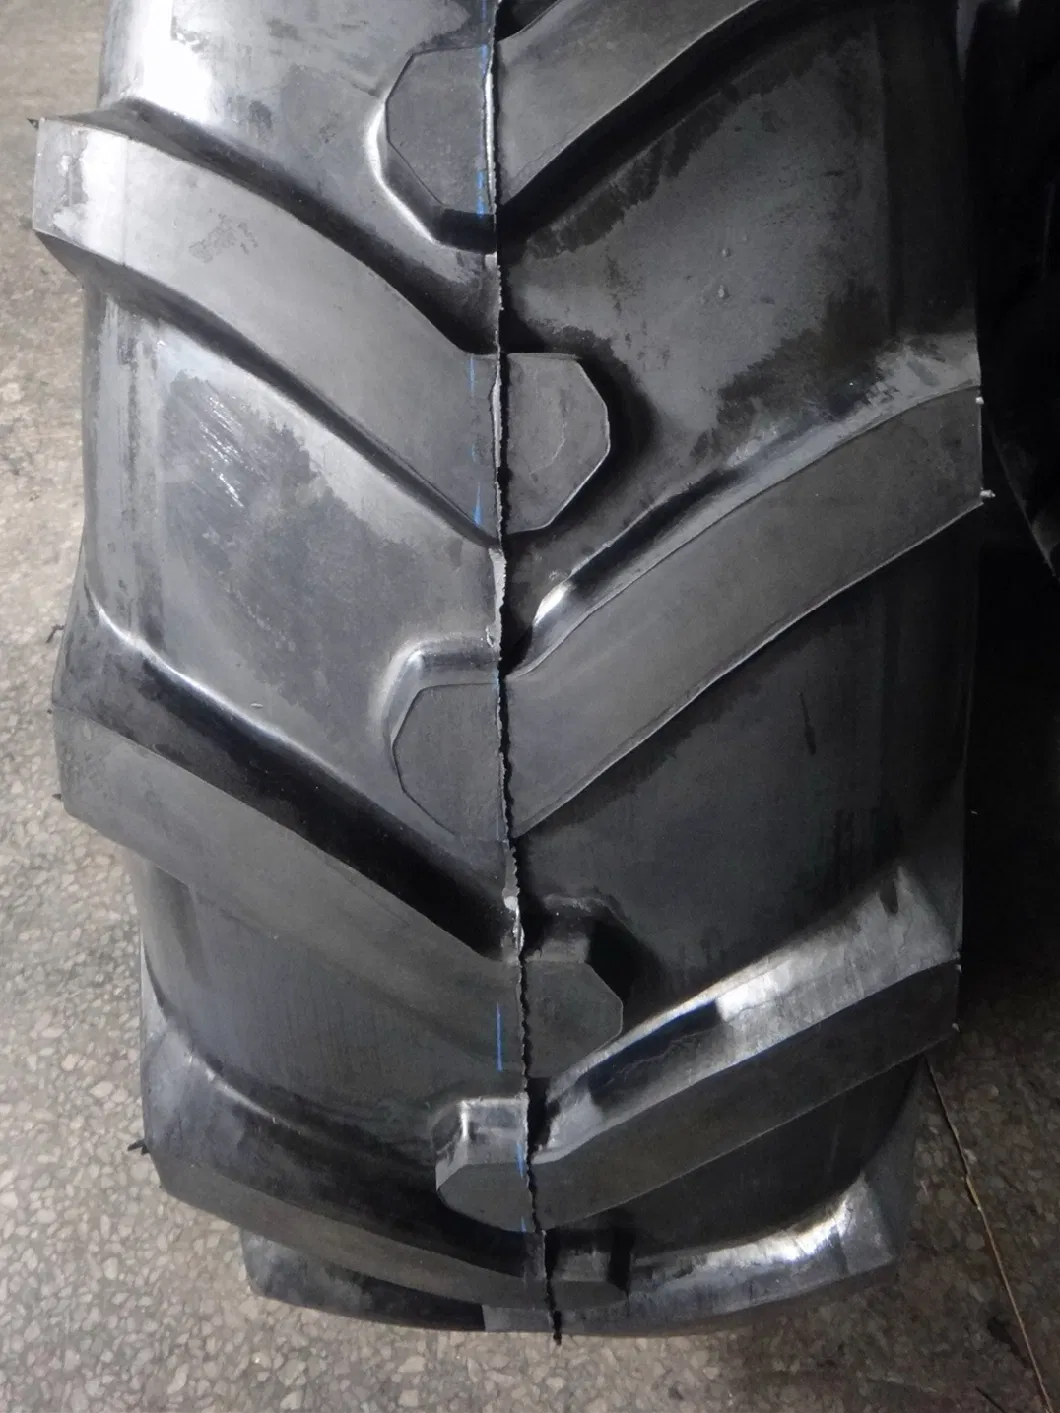 R1, 14.9-24 Bias Nylon Agriculture Farm Tractor Tyre Irrigation Tire with Long Life Time R-1